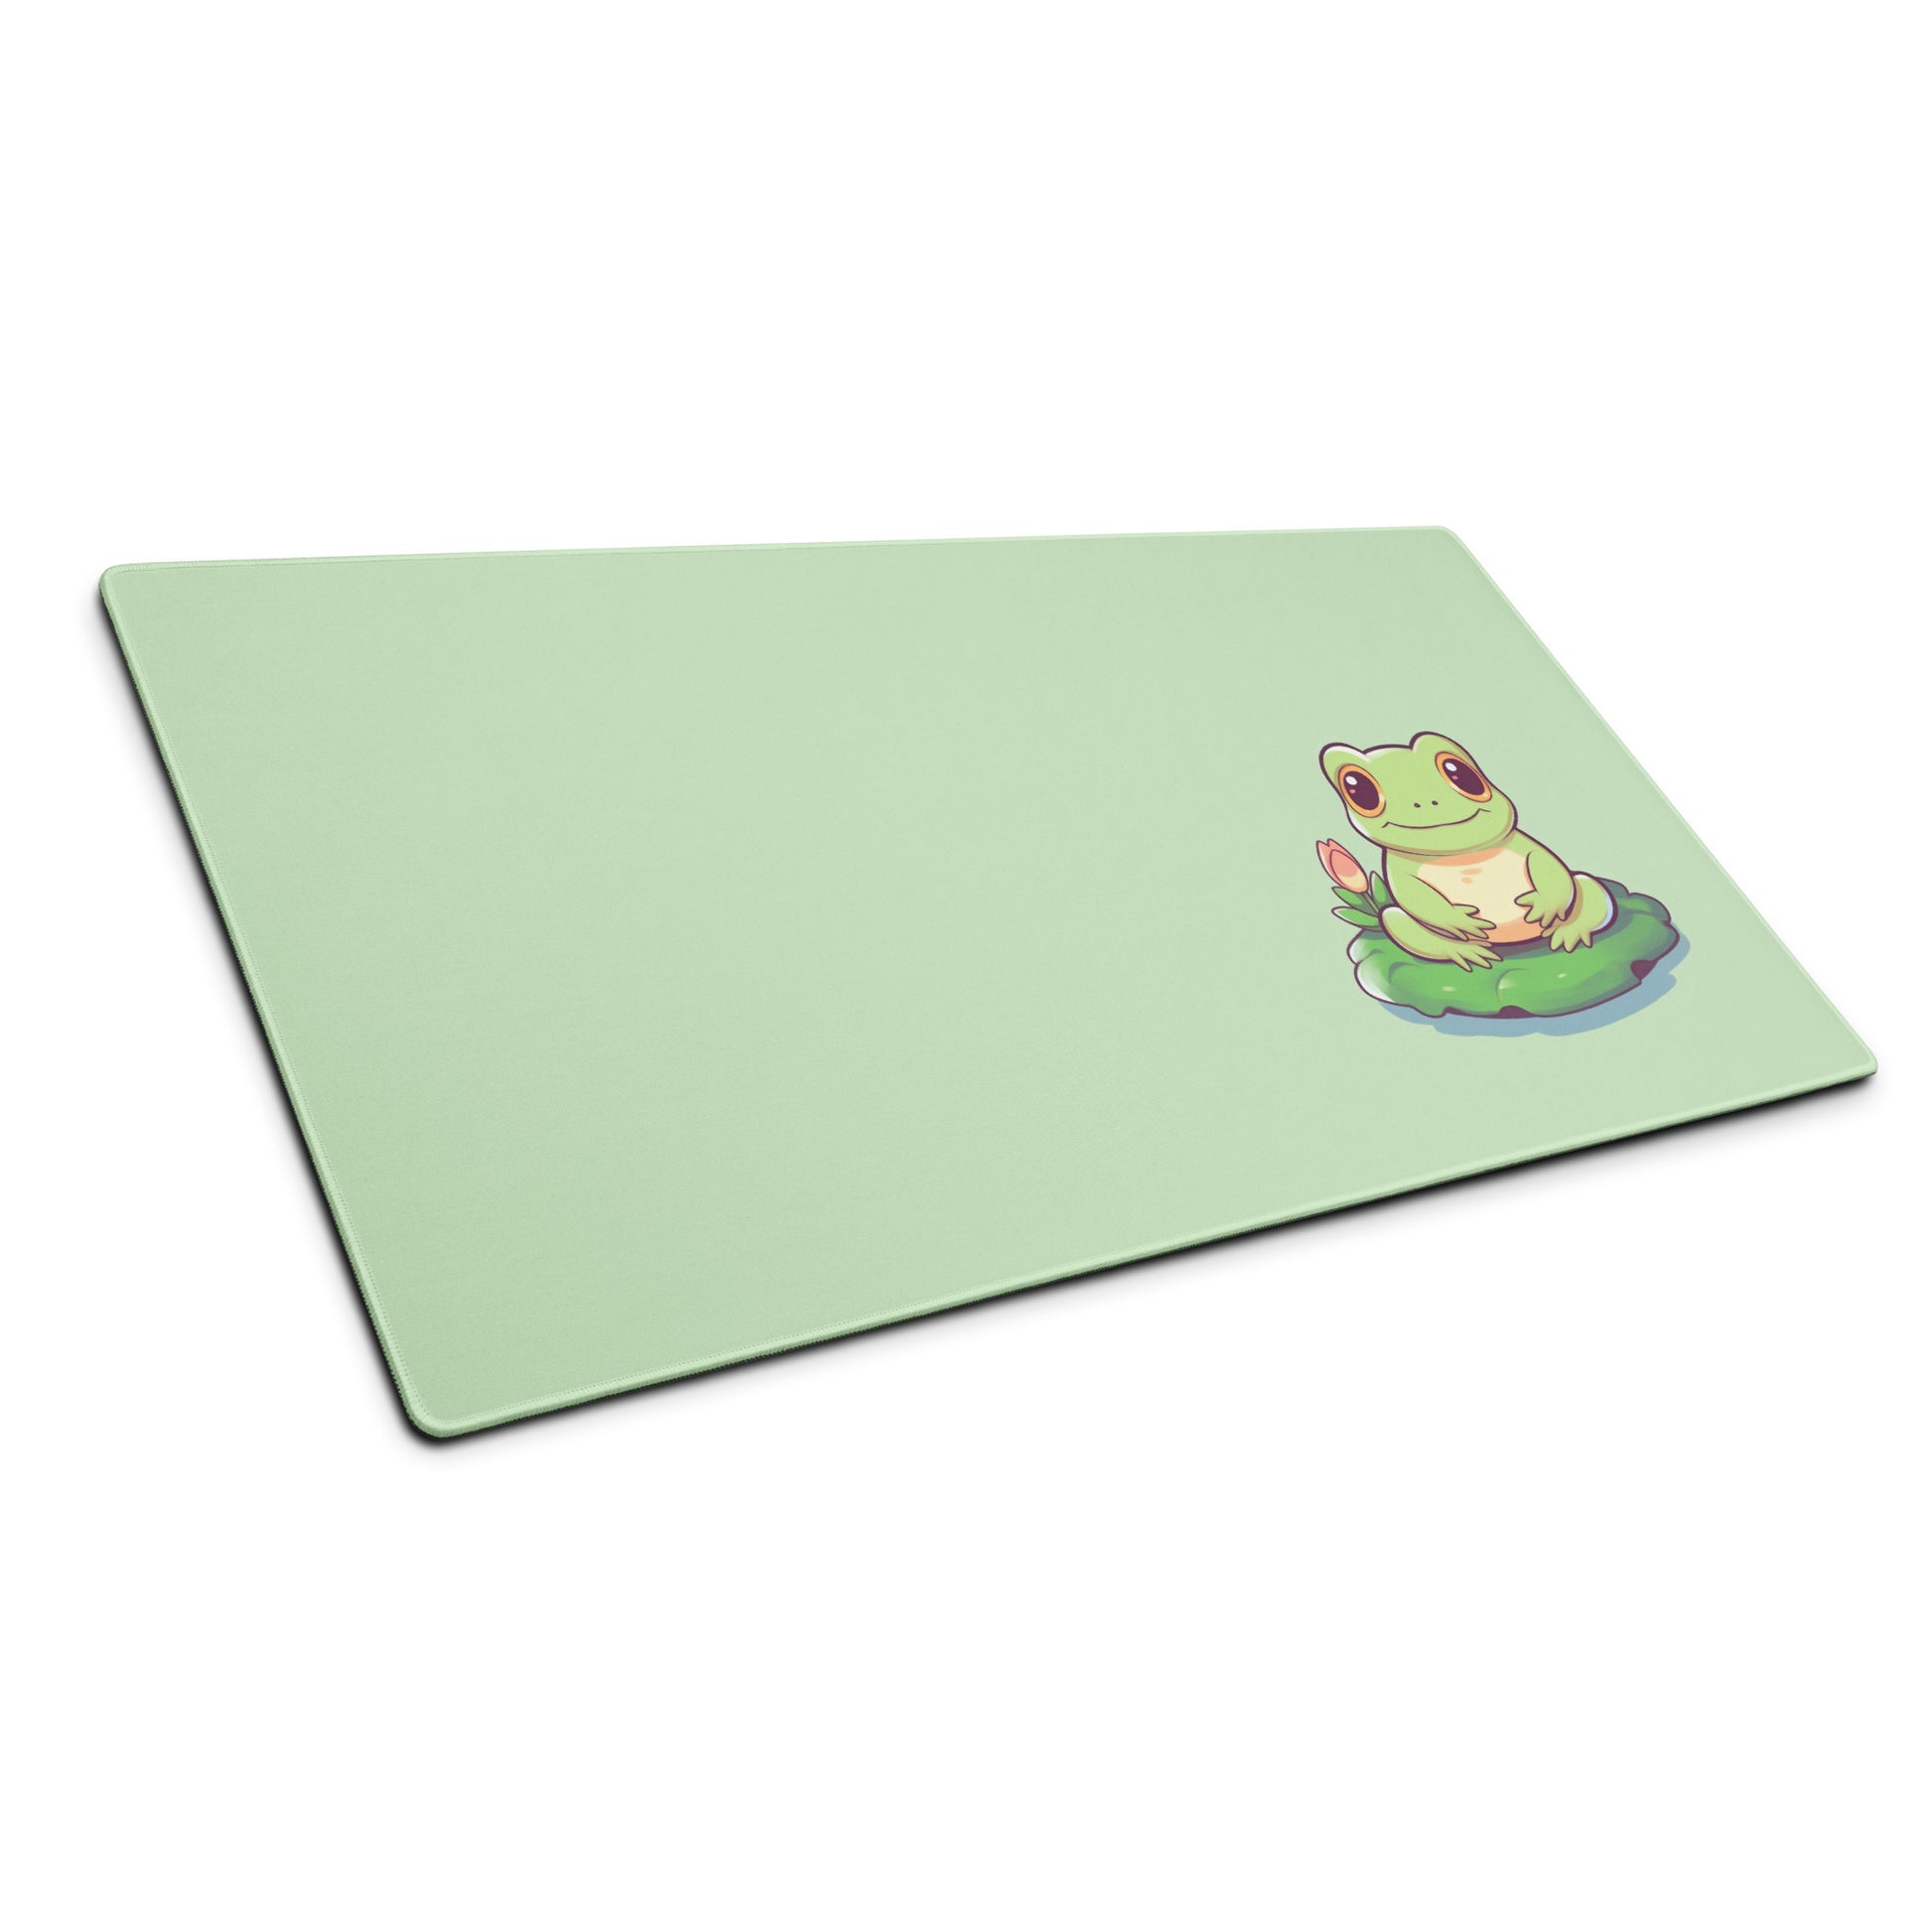 A 36" x 18" desk pad with a cute frog on it shown at an angle. Green in color.